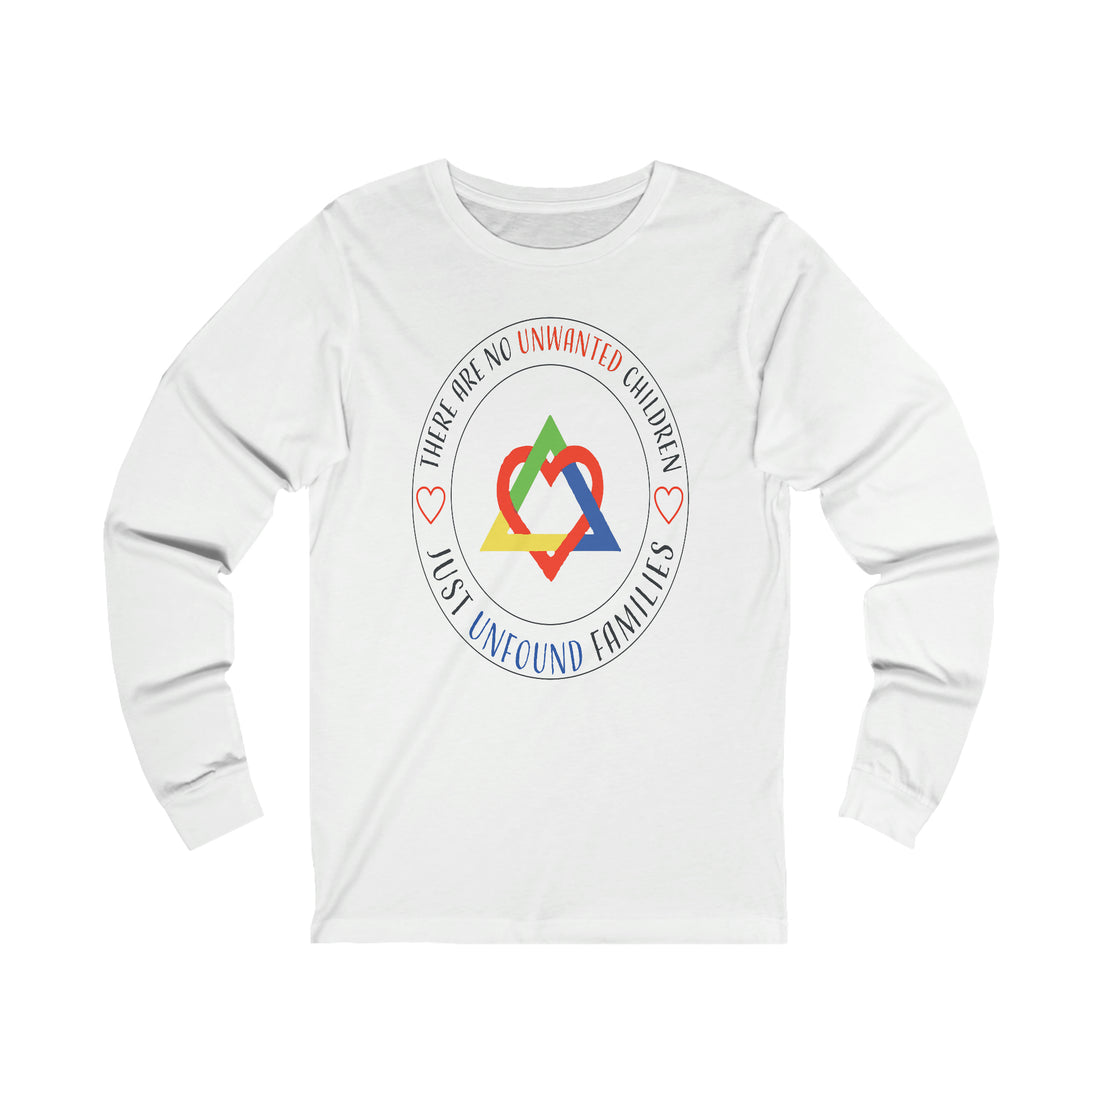 There Are No Unwanted Children Only Unfound Families - Unisex Jersey Long Sleeve Tee